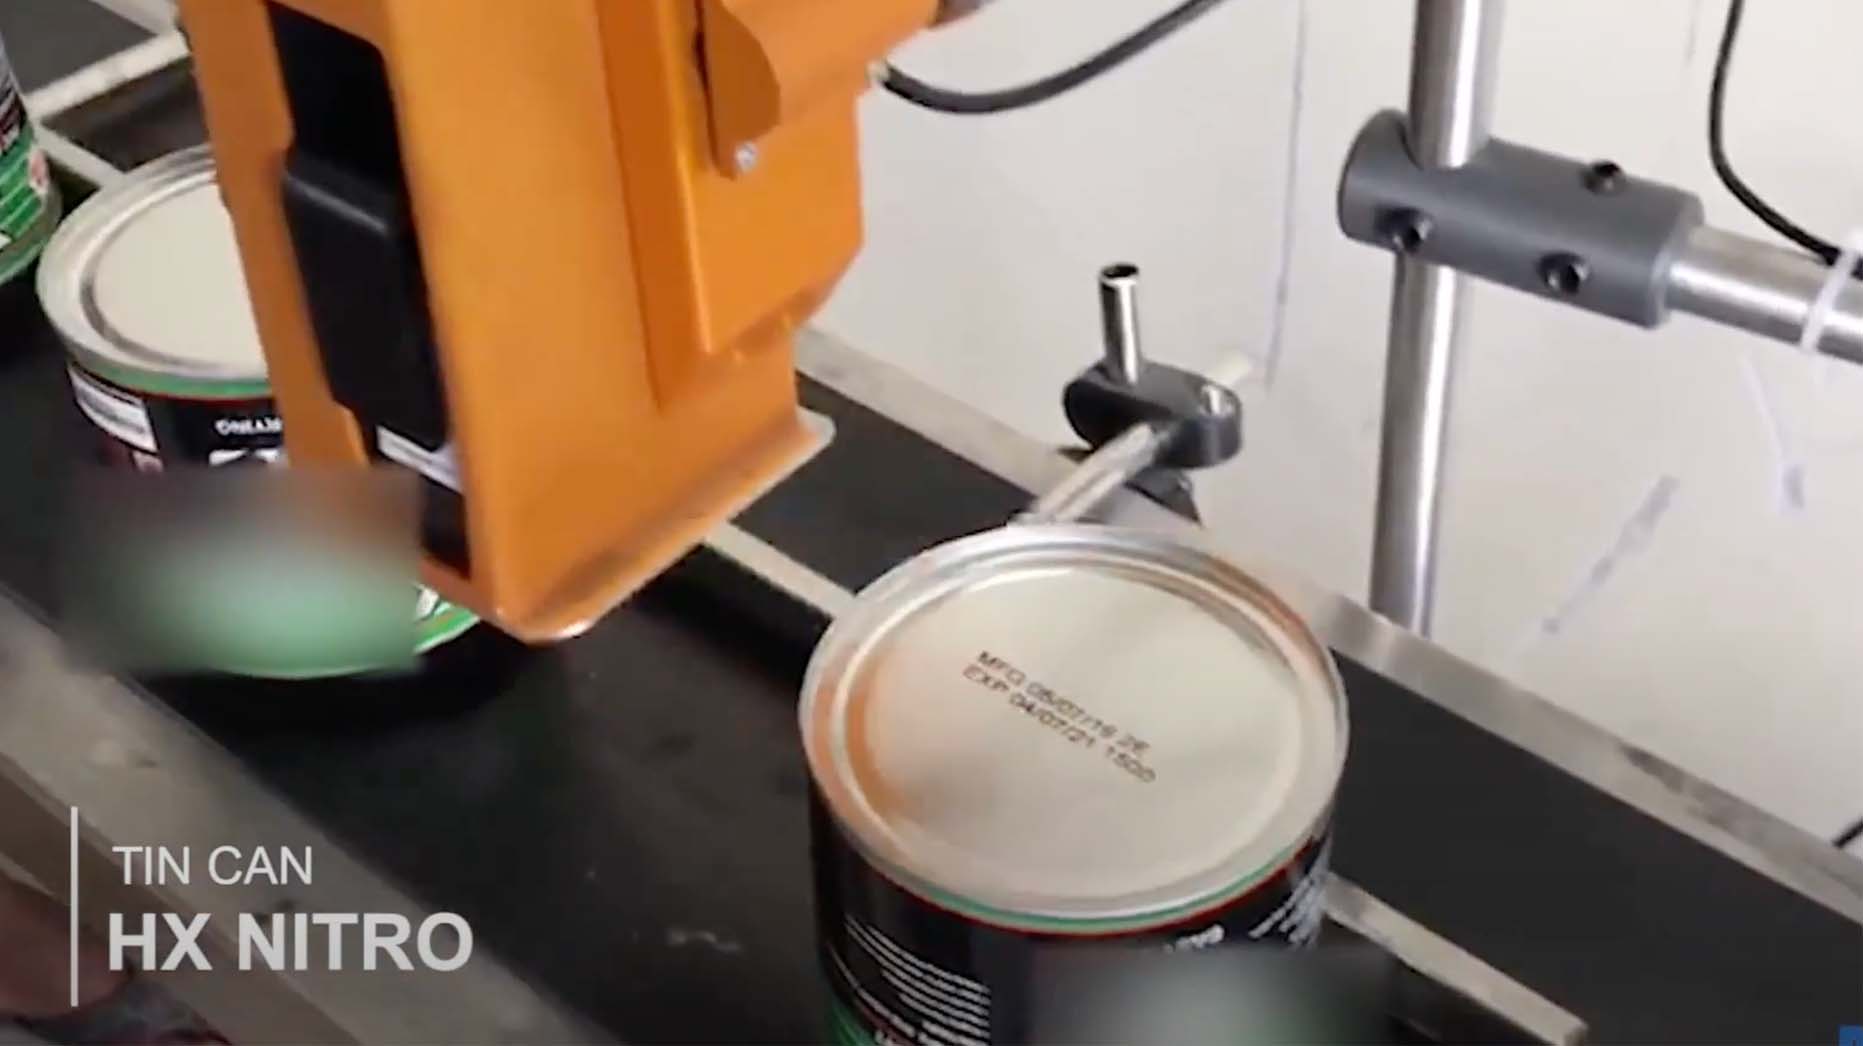 printing on tin cans with hx nitro thermal inkjet printer